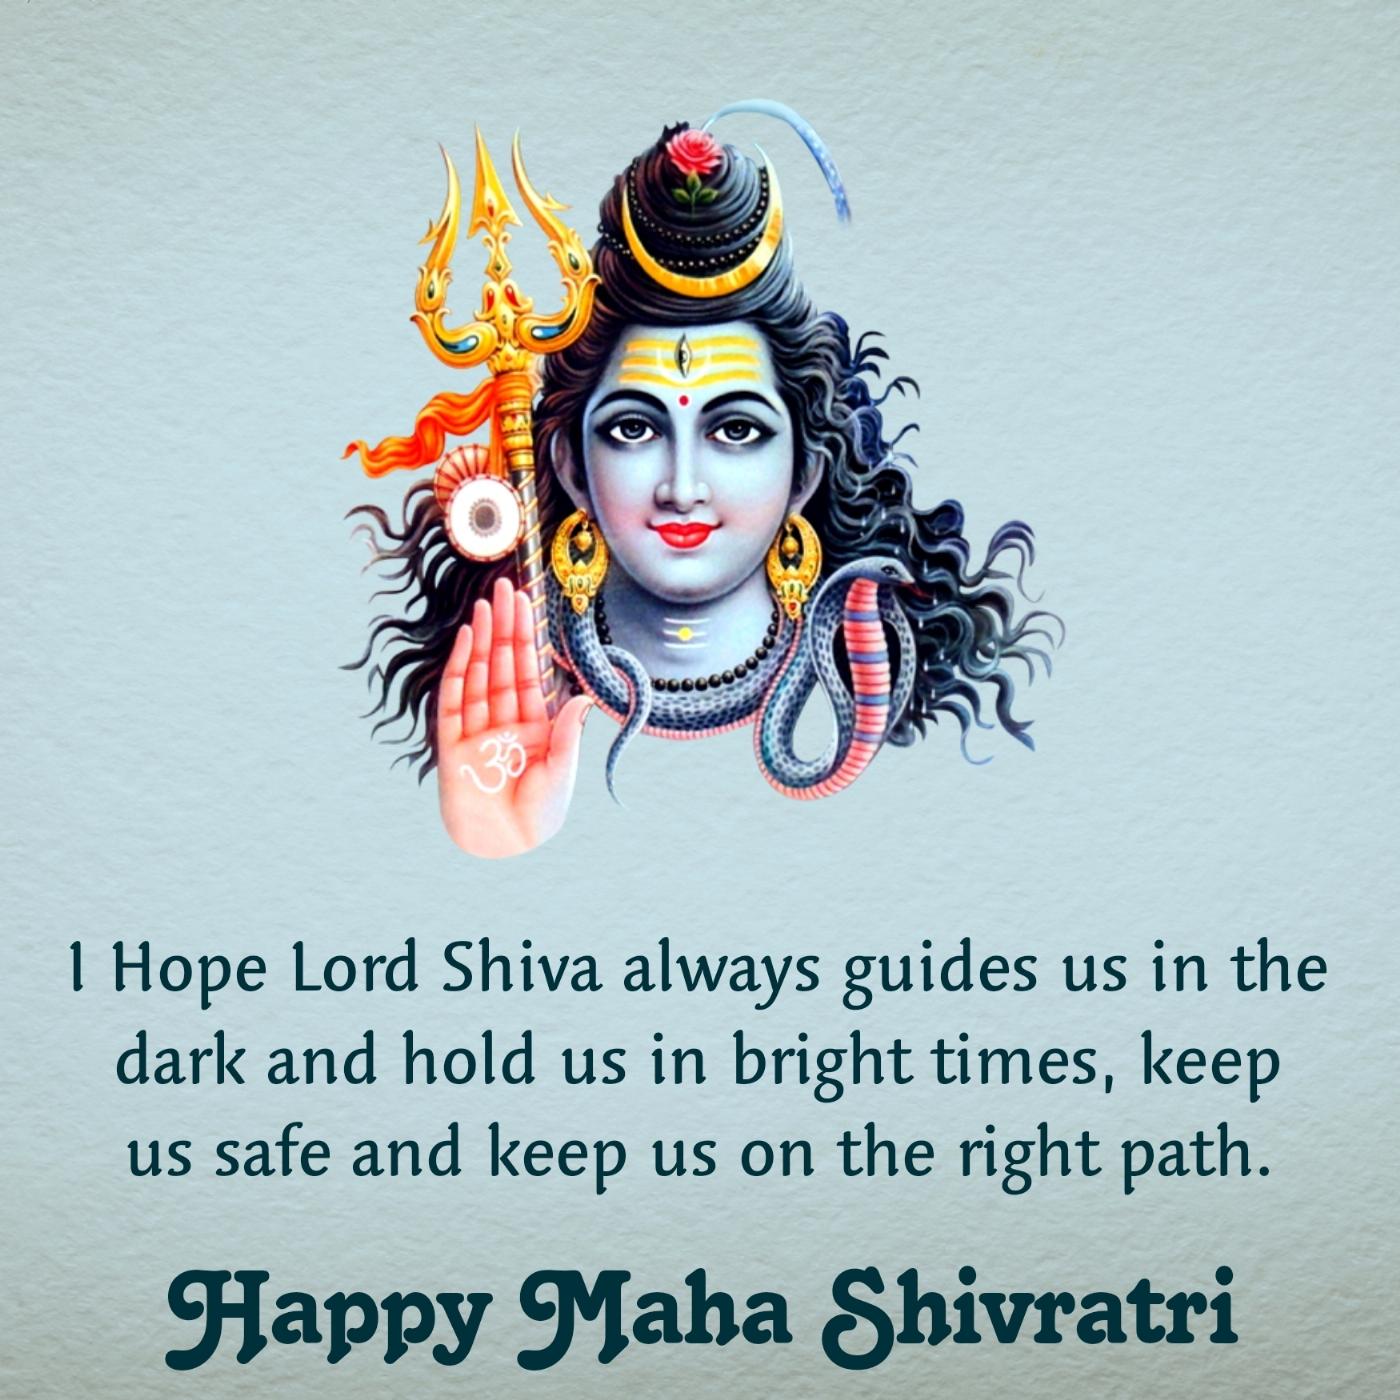 I Hope Lord Shiva always guides us in the dark